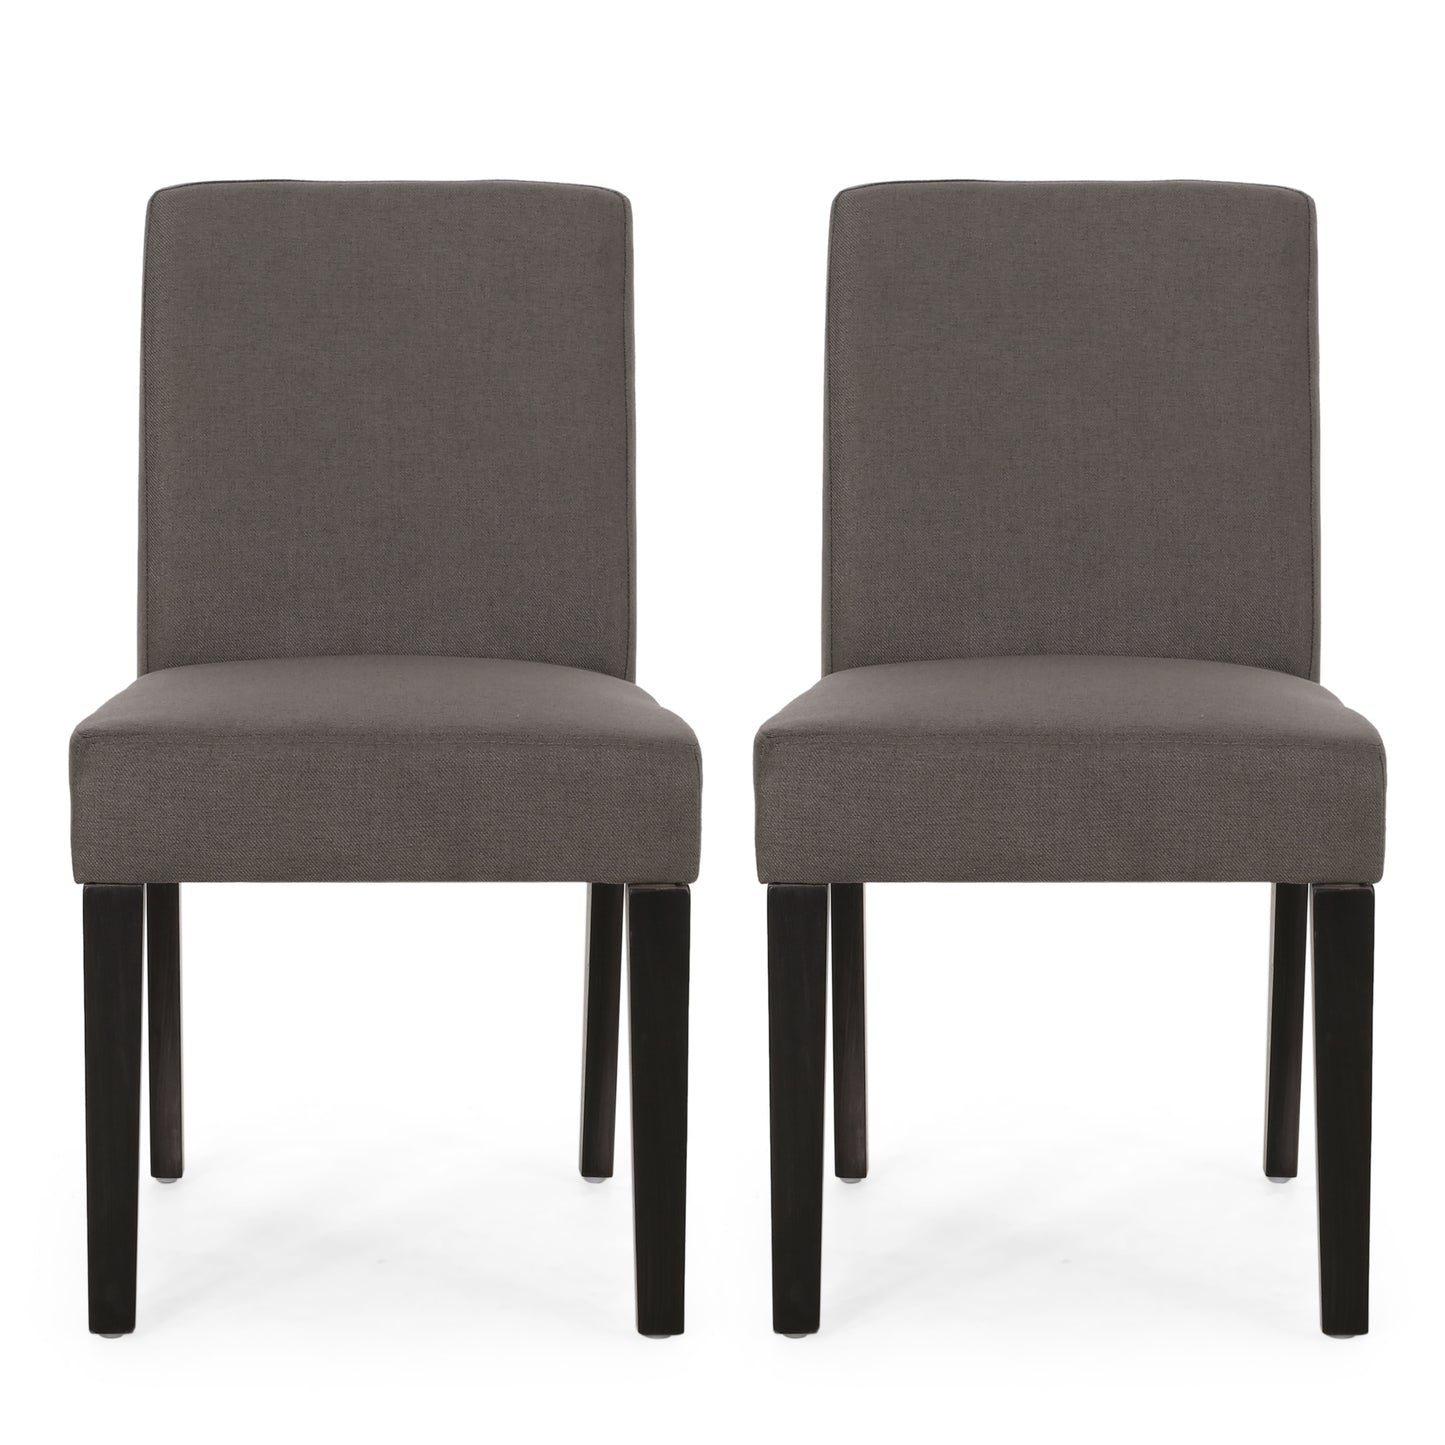 Pocatello Kuna Contemporary Upholstered Dining Chair, Set of 2